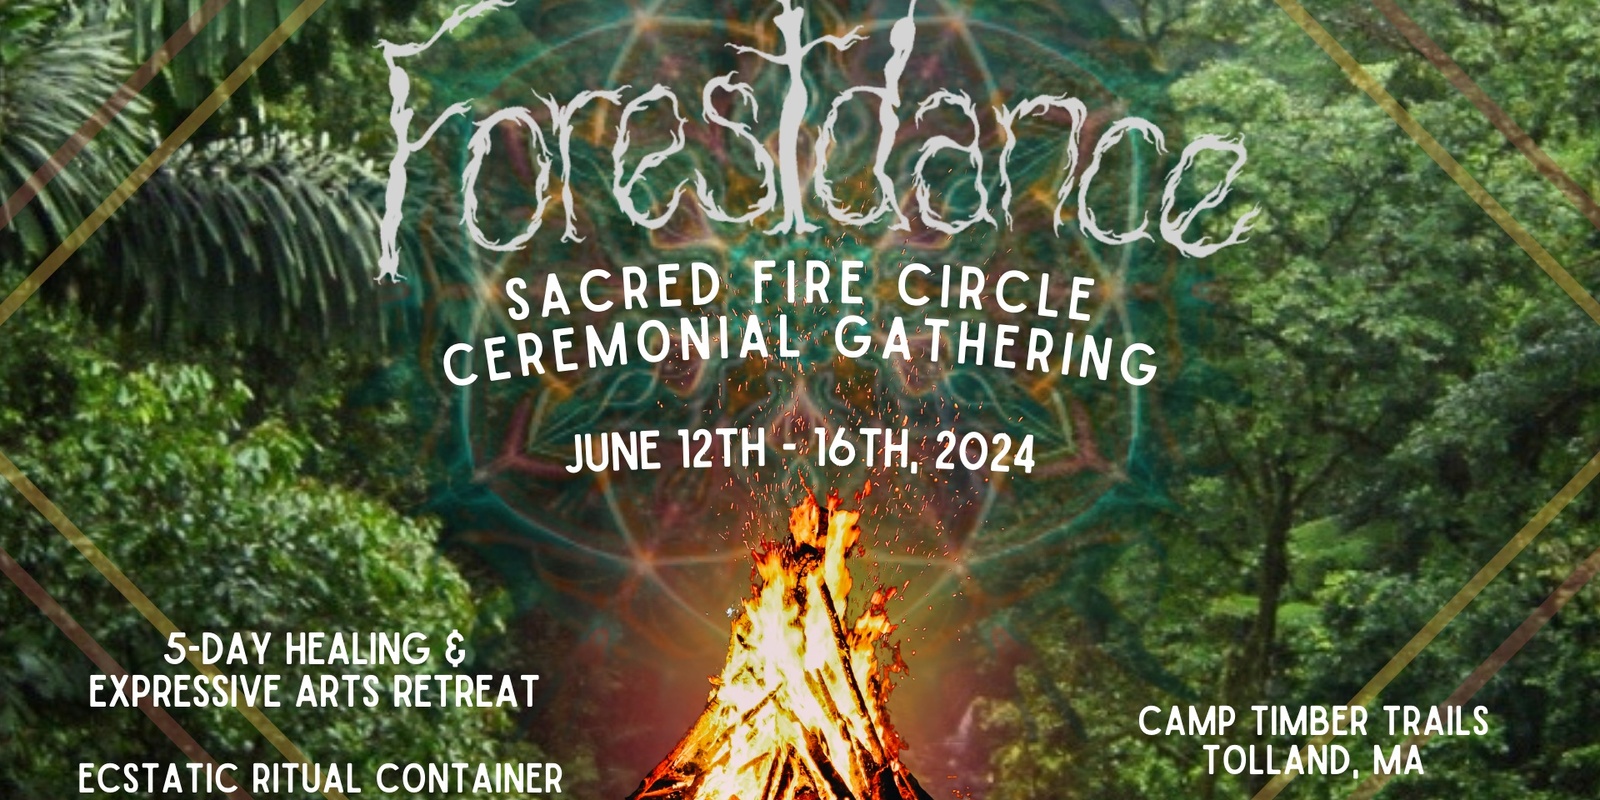 Banner image for Forestdance Fire Circle Ceremonial Gathering 